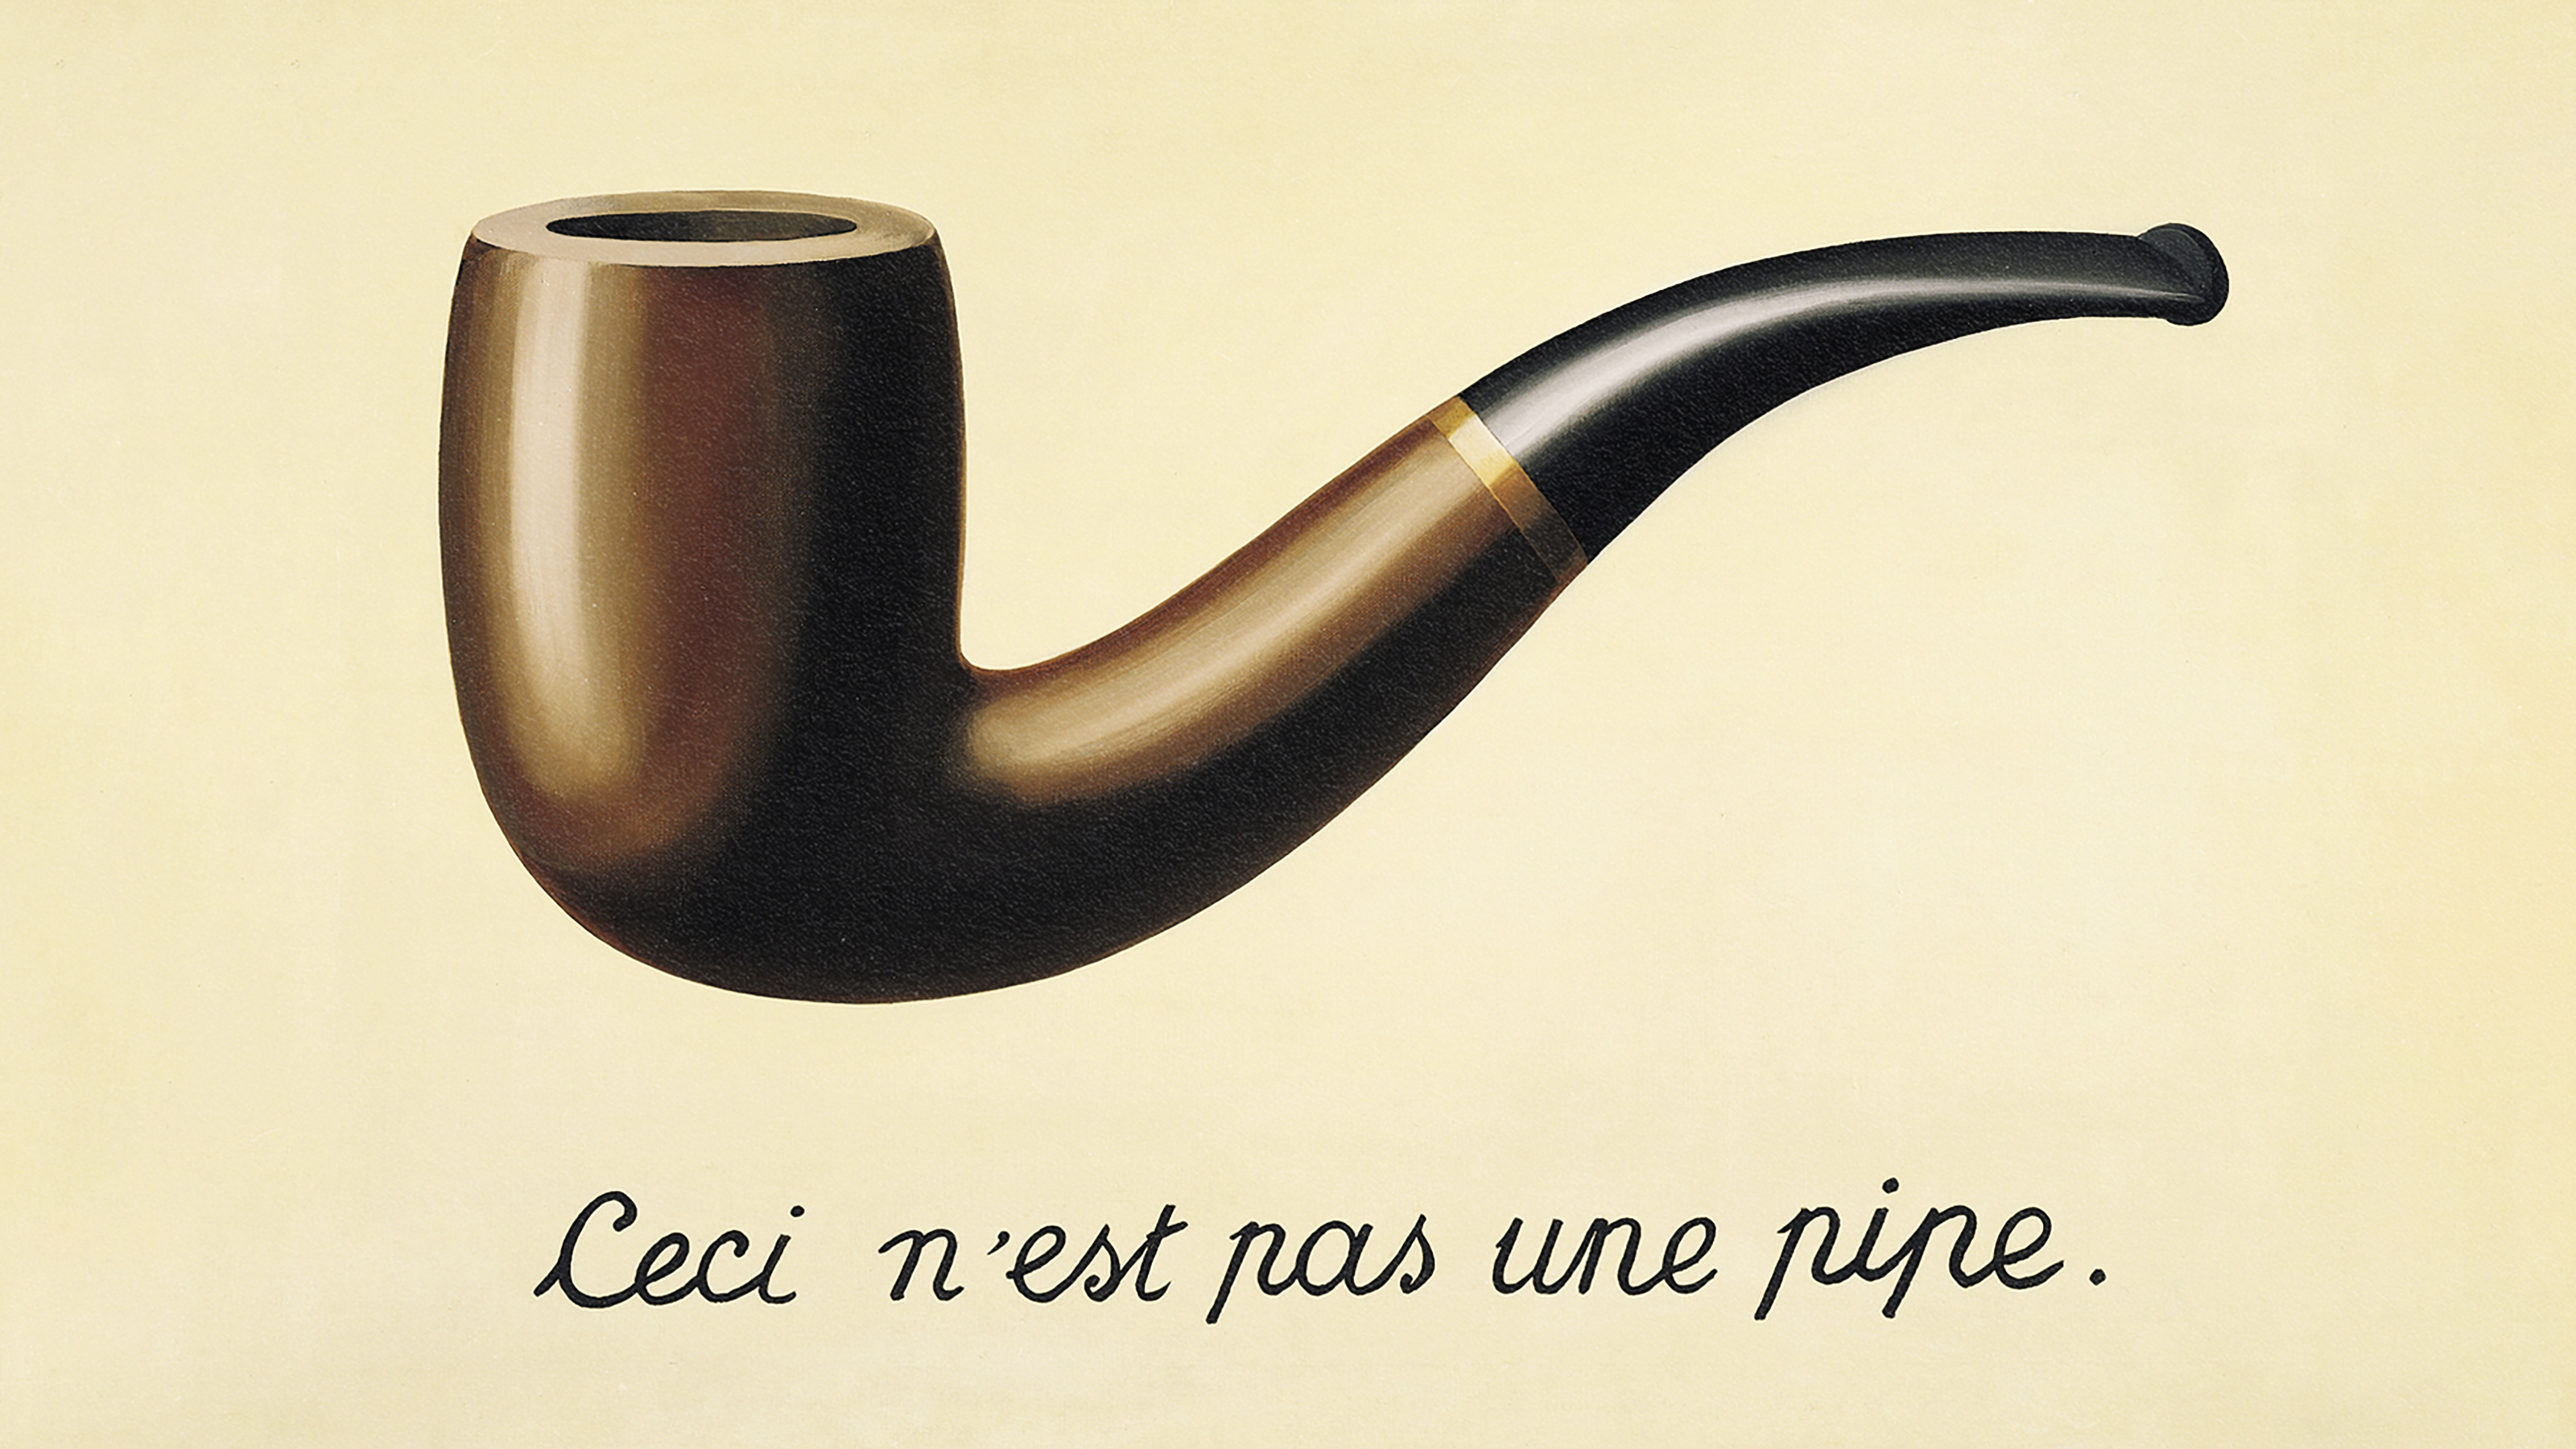 A painting challenging perception with the words 'c'est pas une pipe'.